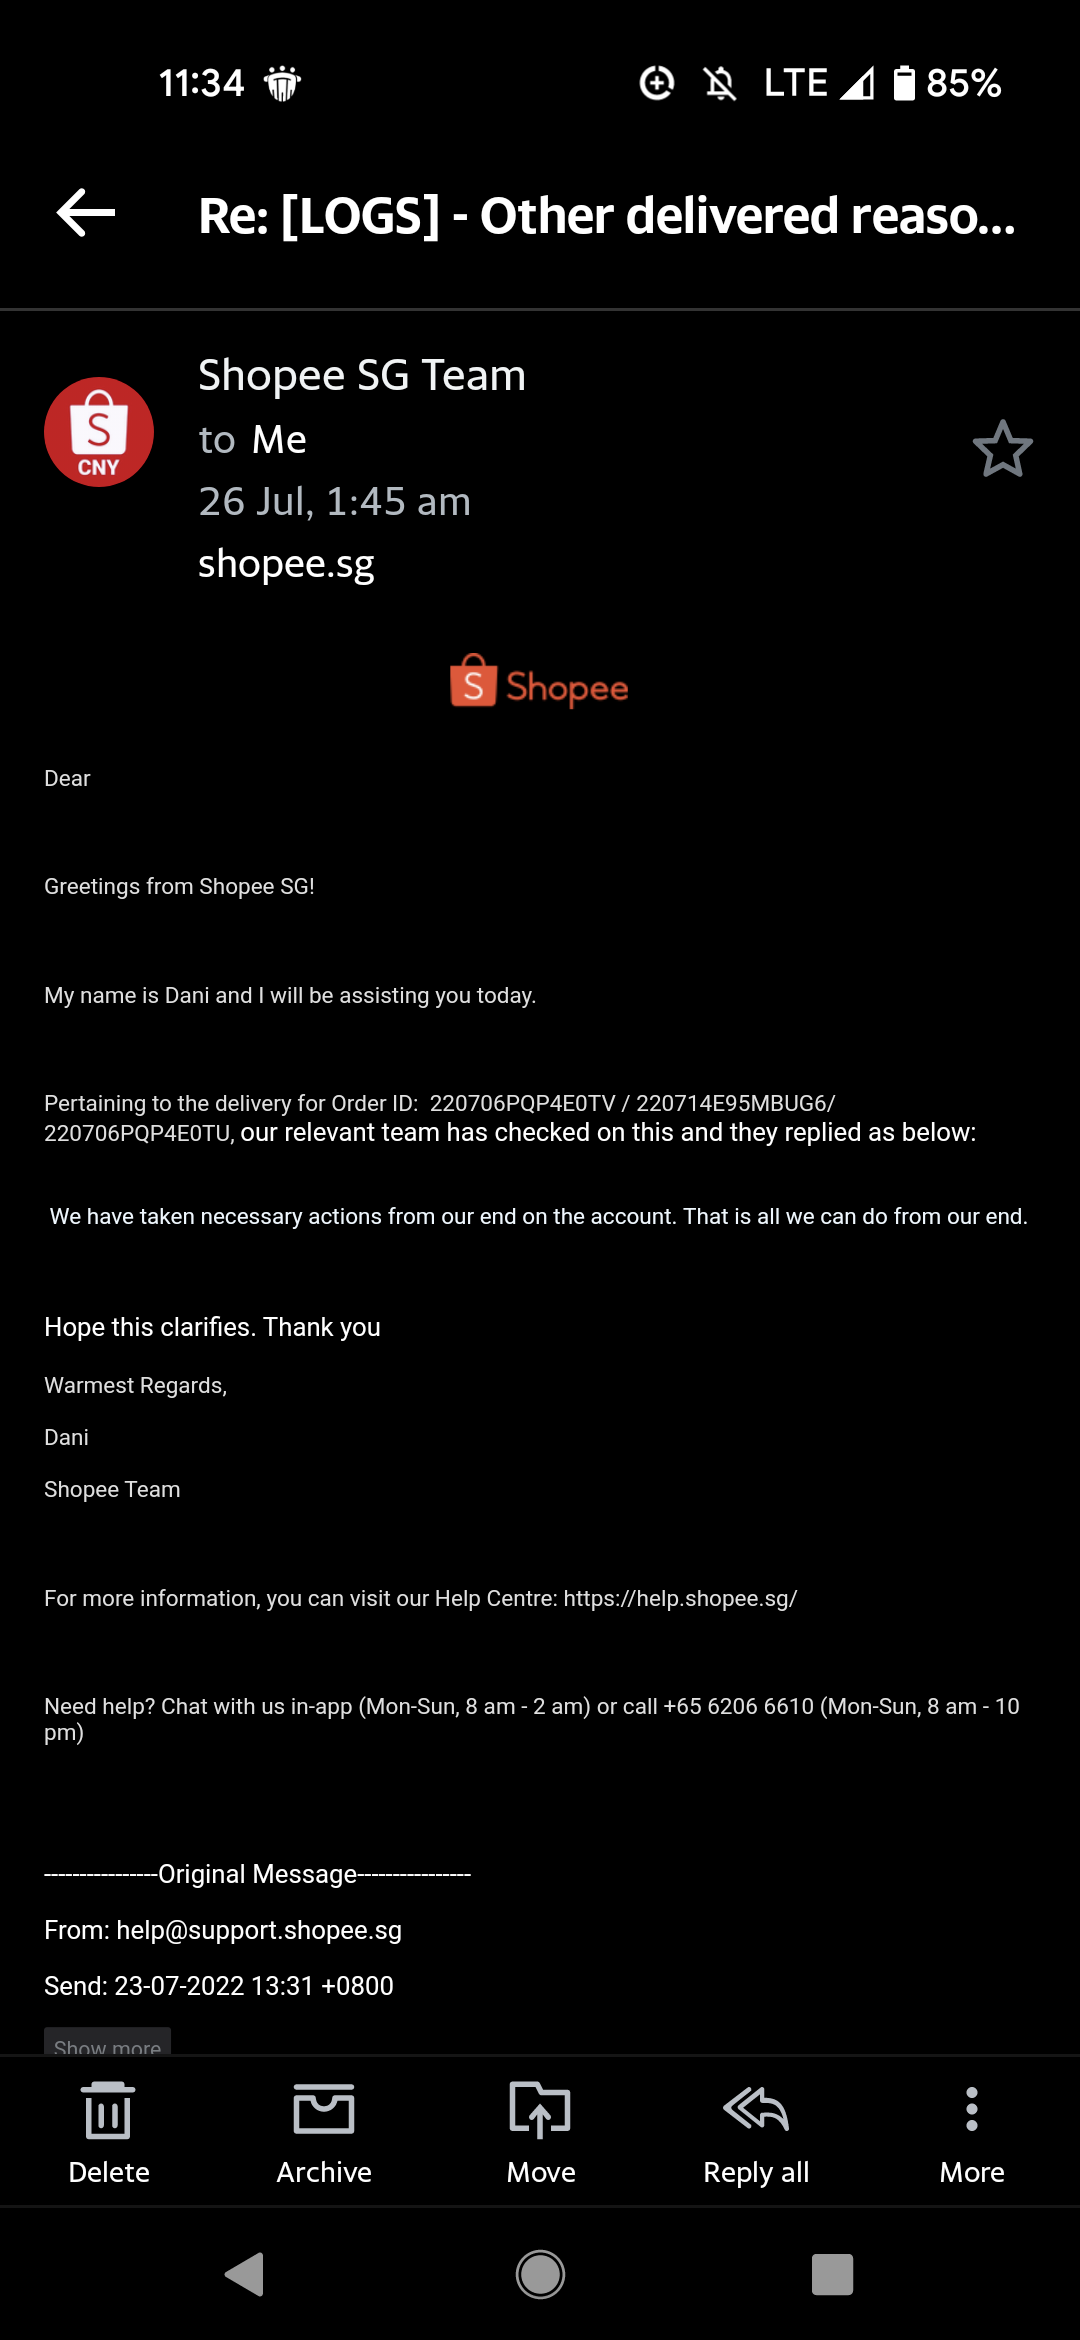 S'porean woman vexed after bogus unsolicited Shopee packages